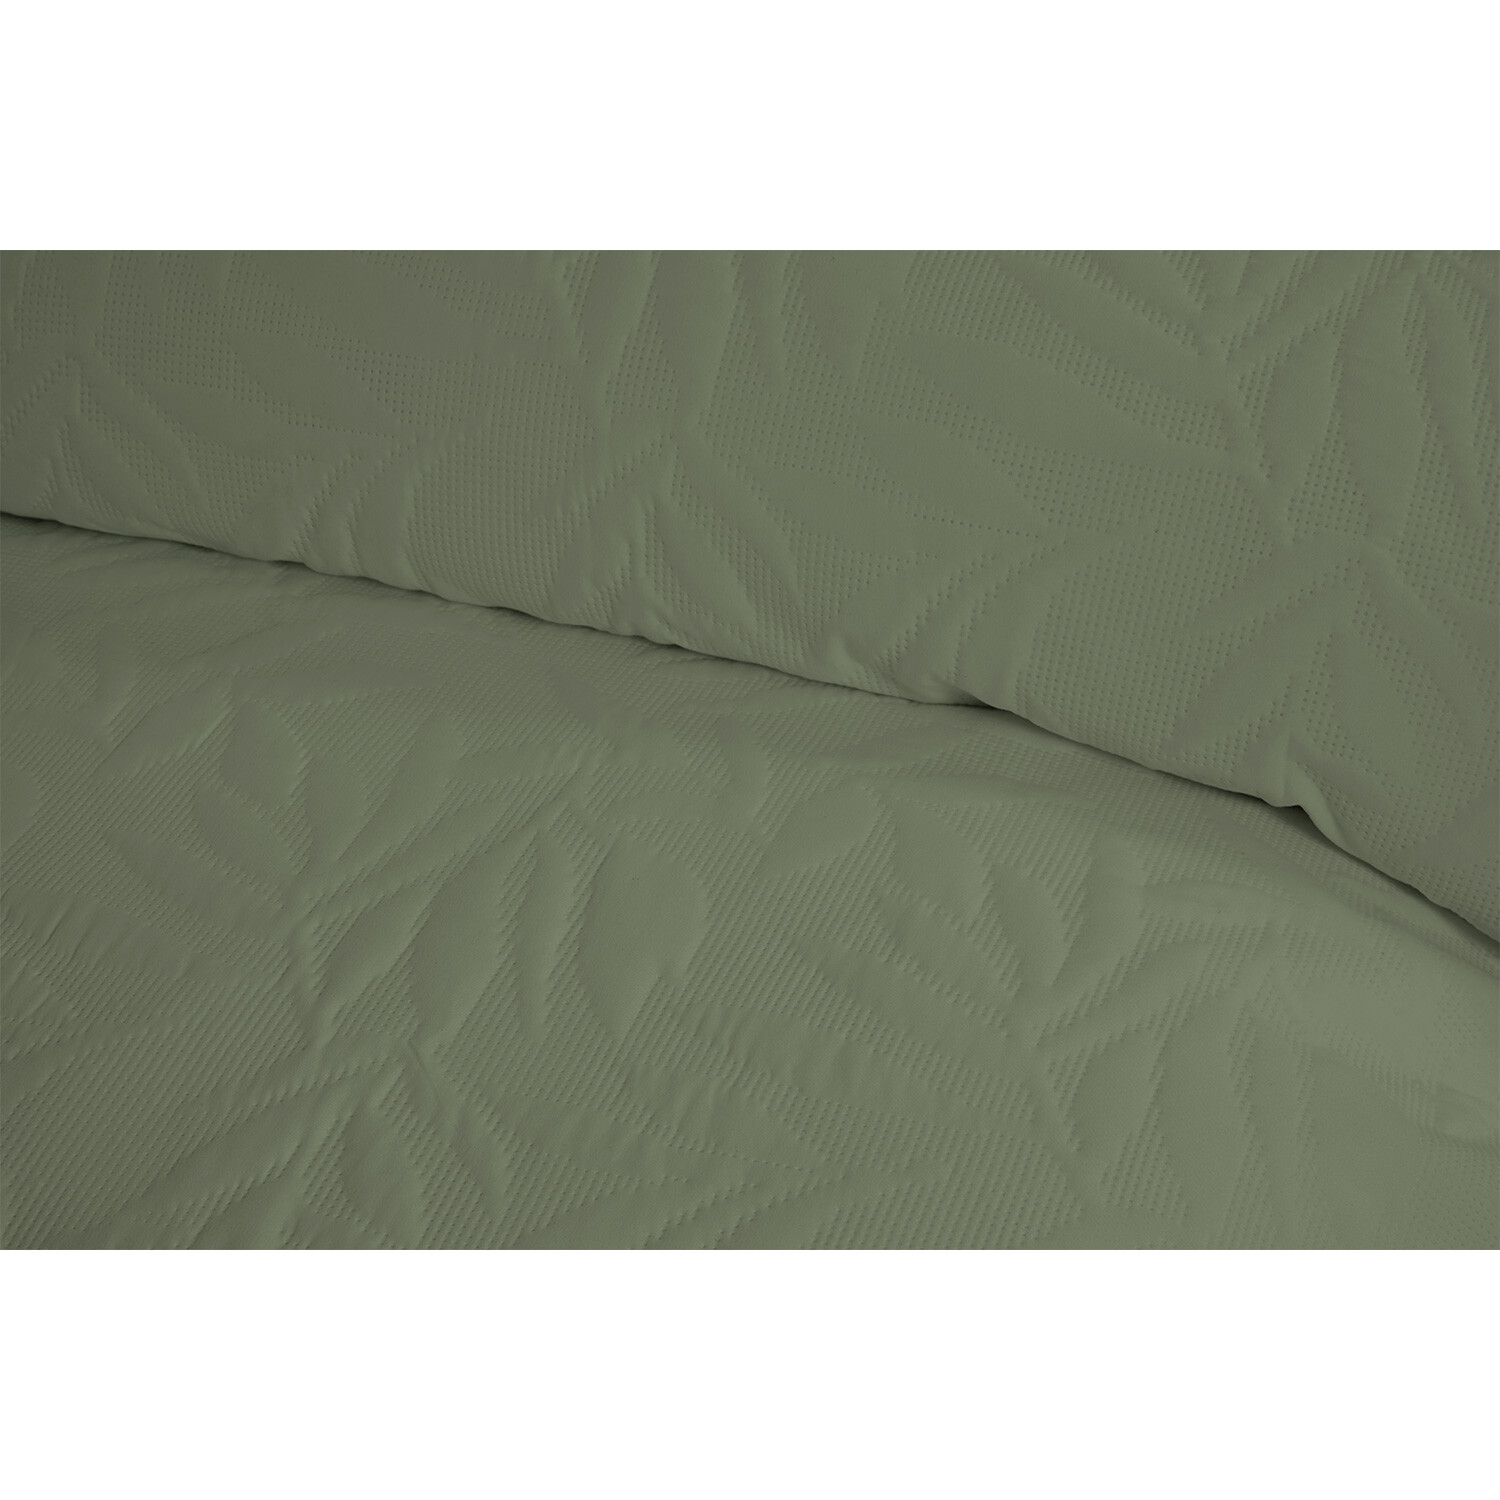 Avery Leaf Duvet Cover and Pillowcase Set - Olive Green / Superking Image 3